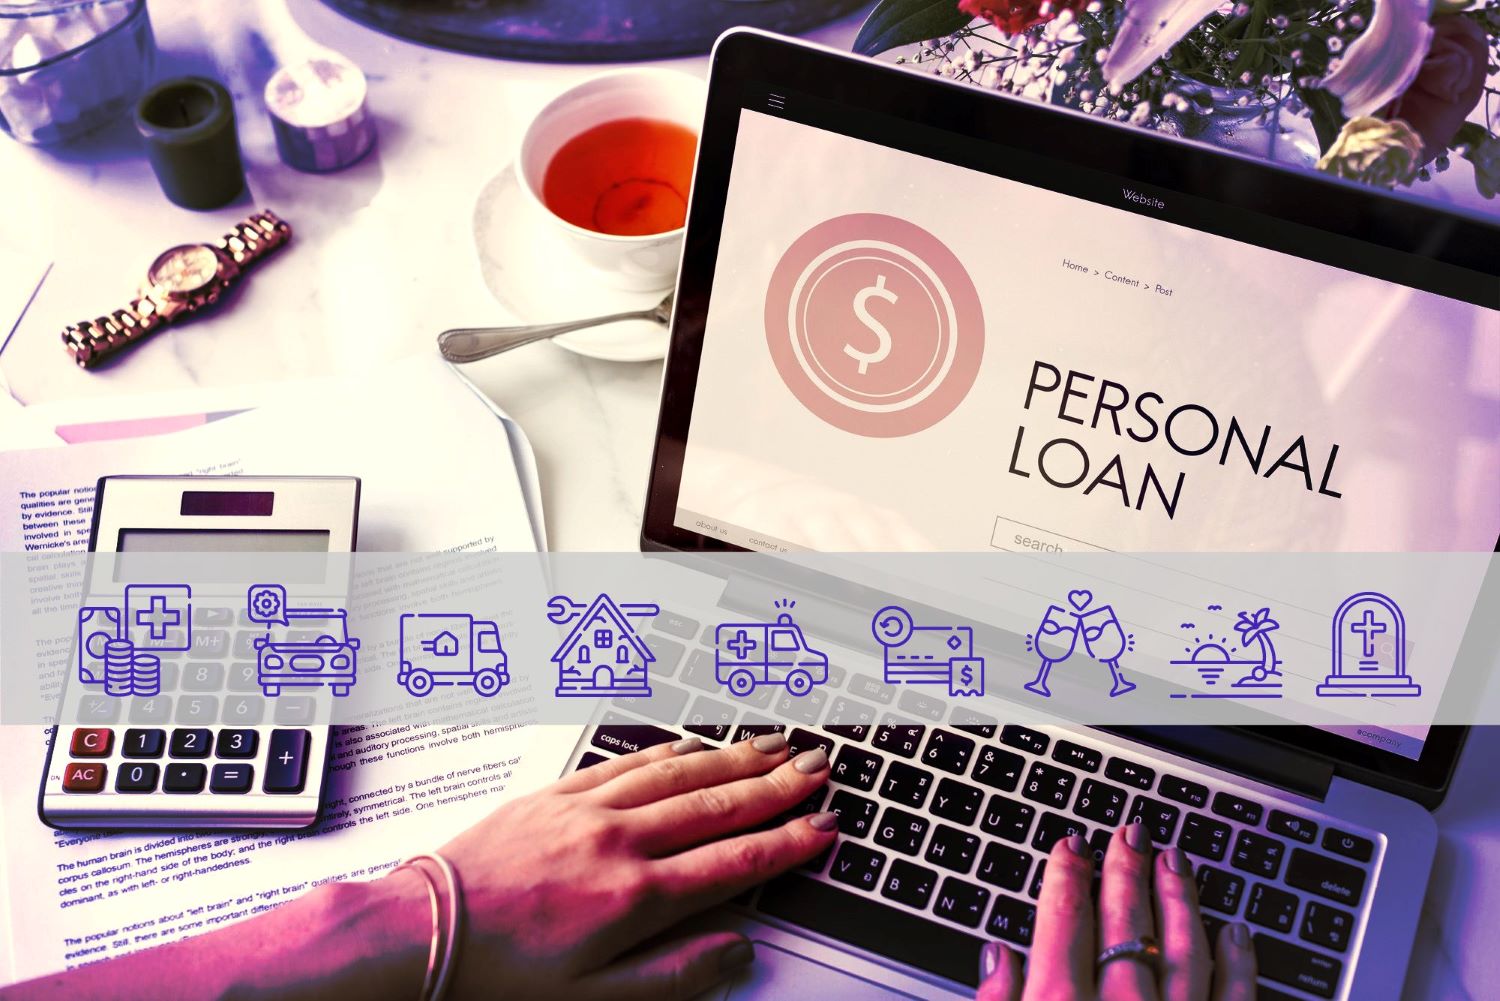 Common uses for personal loans